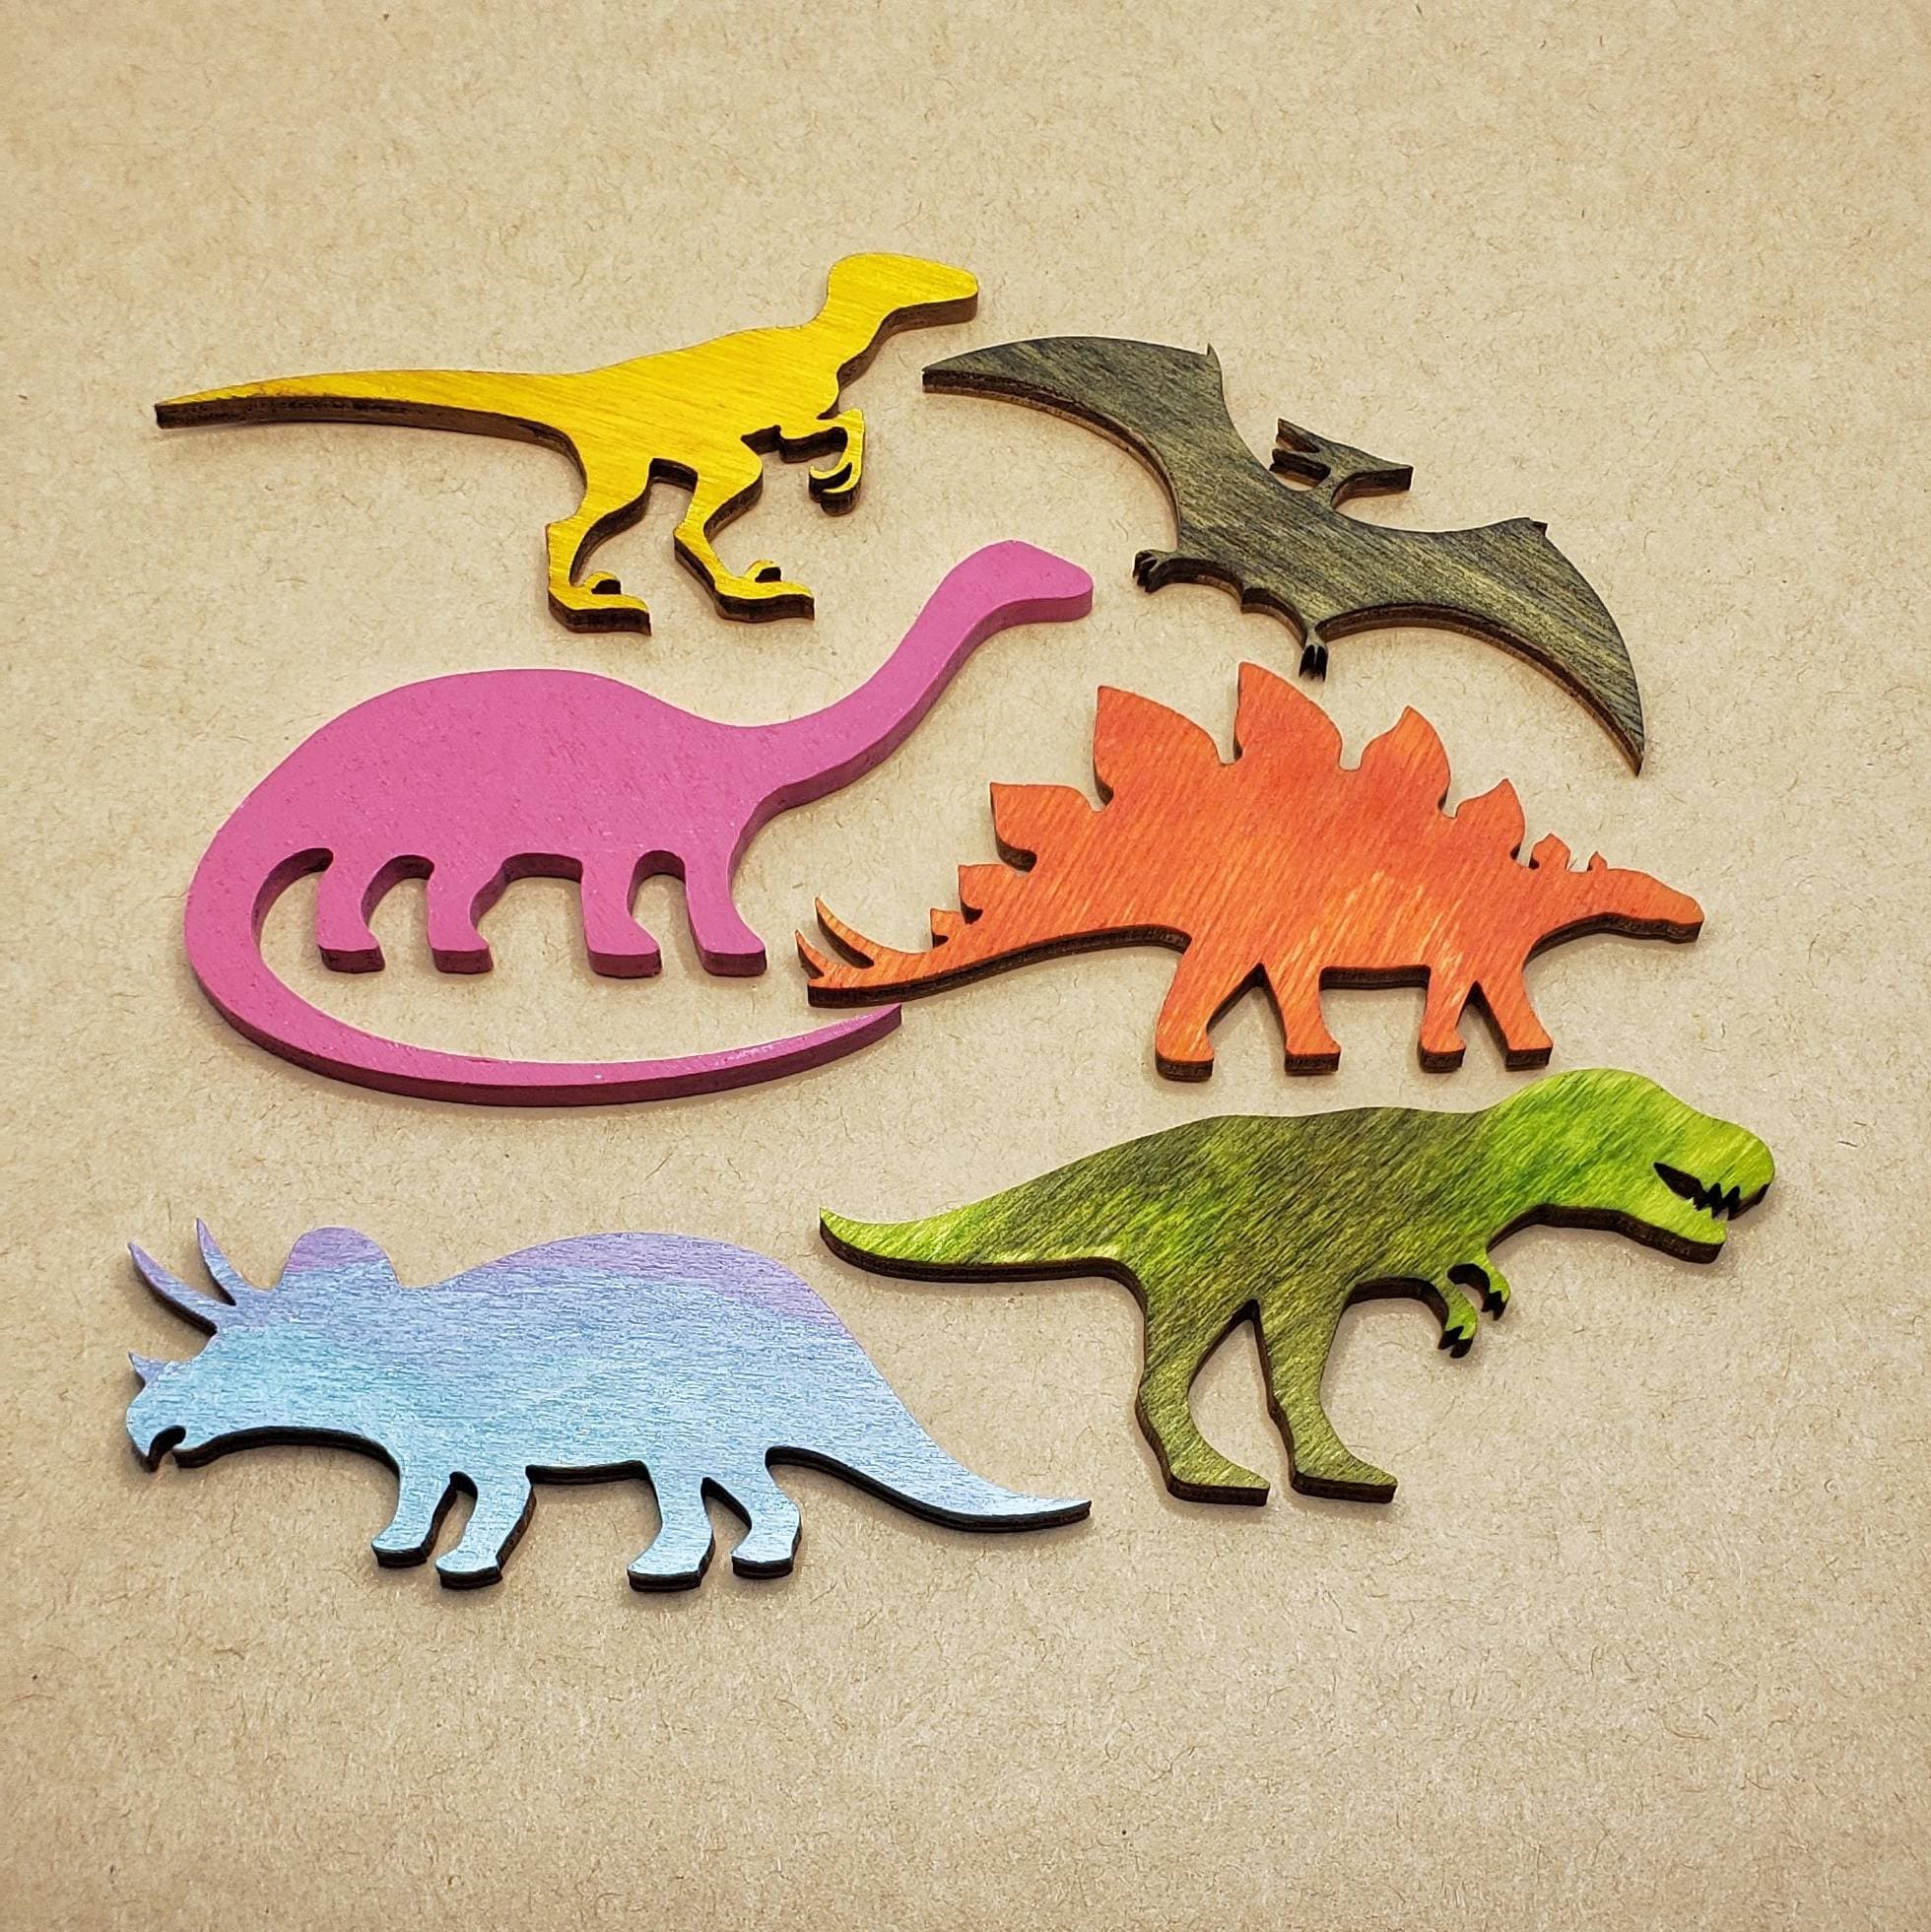 Cute Dinosaur Magnets Kitchen School Classroom Whiteboard Office Magnetic Board Decorative Magnets Kids Students Gift 28Pcs Motivational Refrigerator Magnets 